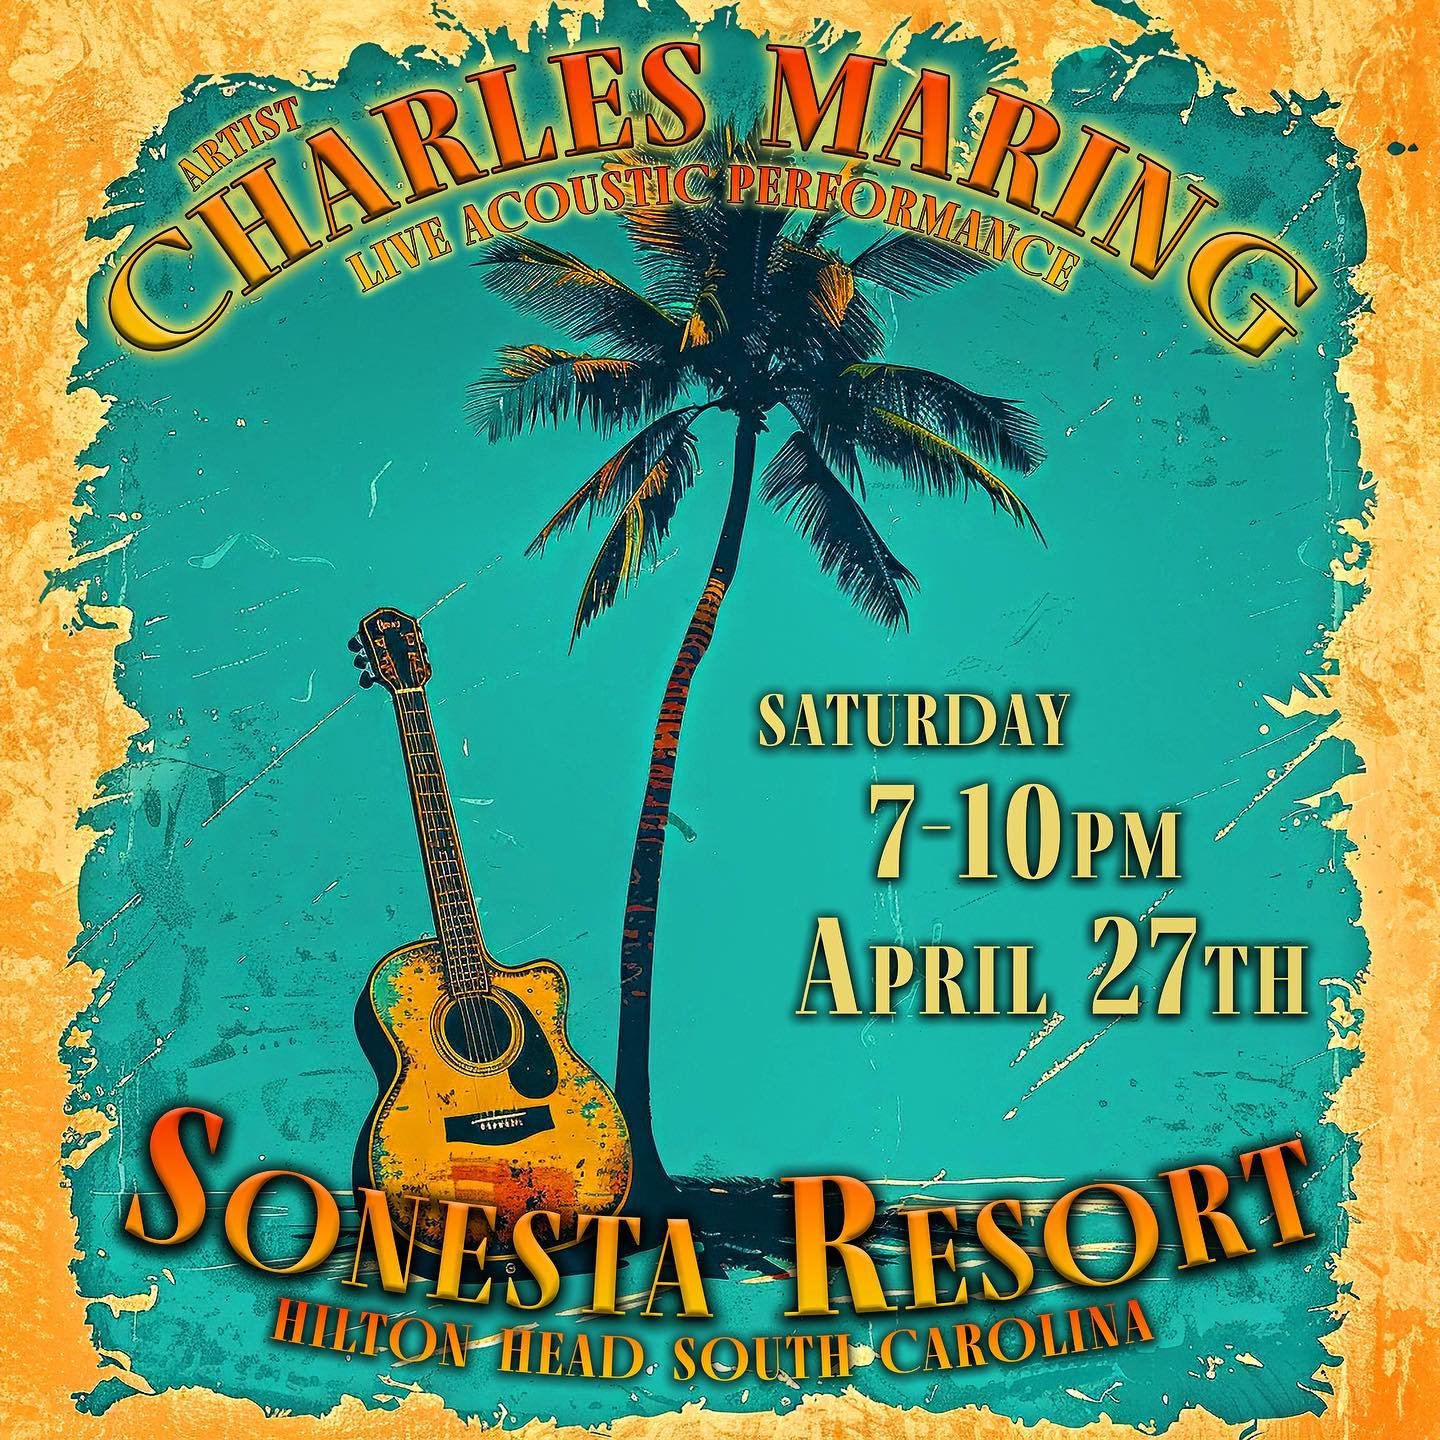 Saturday night I&rsquo;m rock&rsquo;n out a solo performance at @sonestahhi Looking forward to meeting folks from all over and sharing some stories. #hiltonheadisland #musicians #songwriter #hhi #acoustic #livemusic